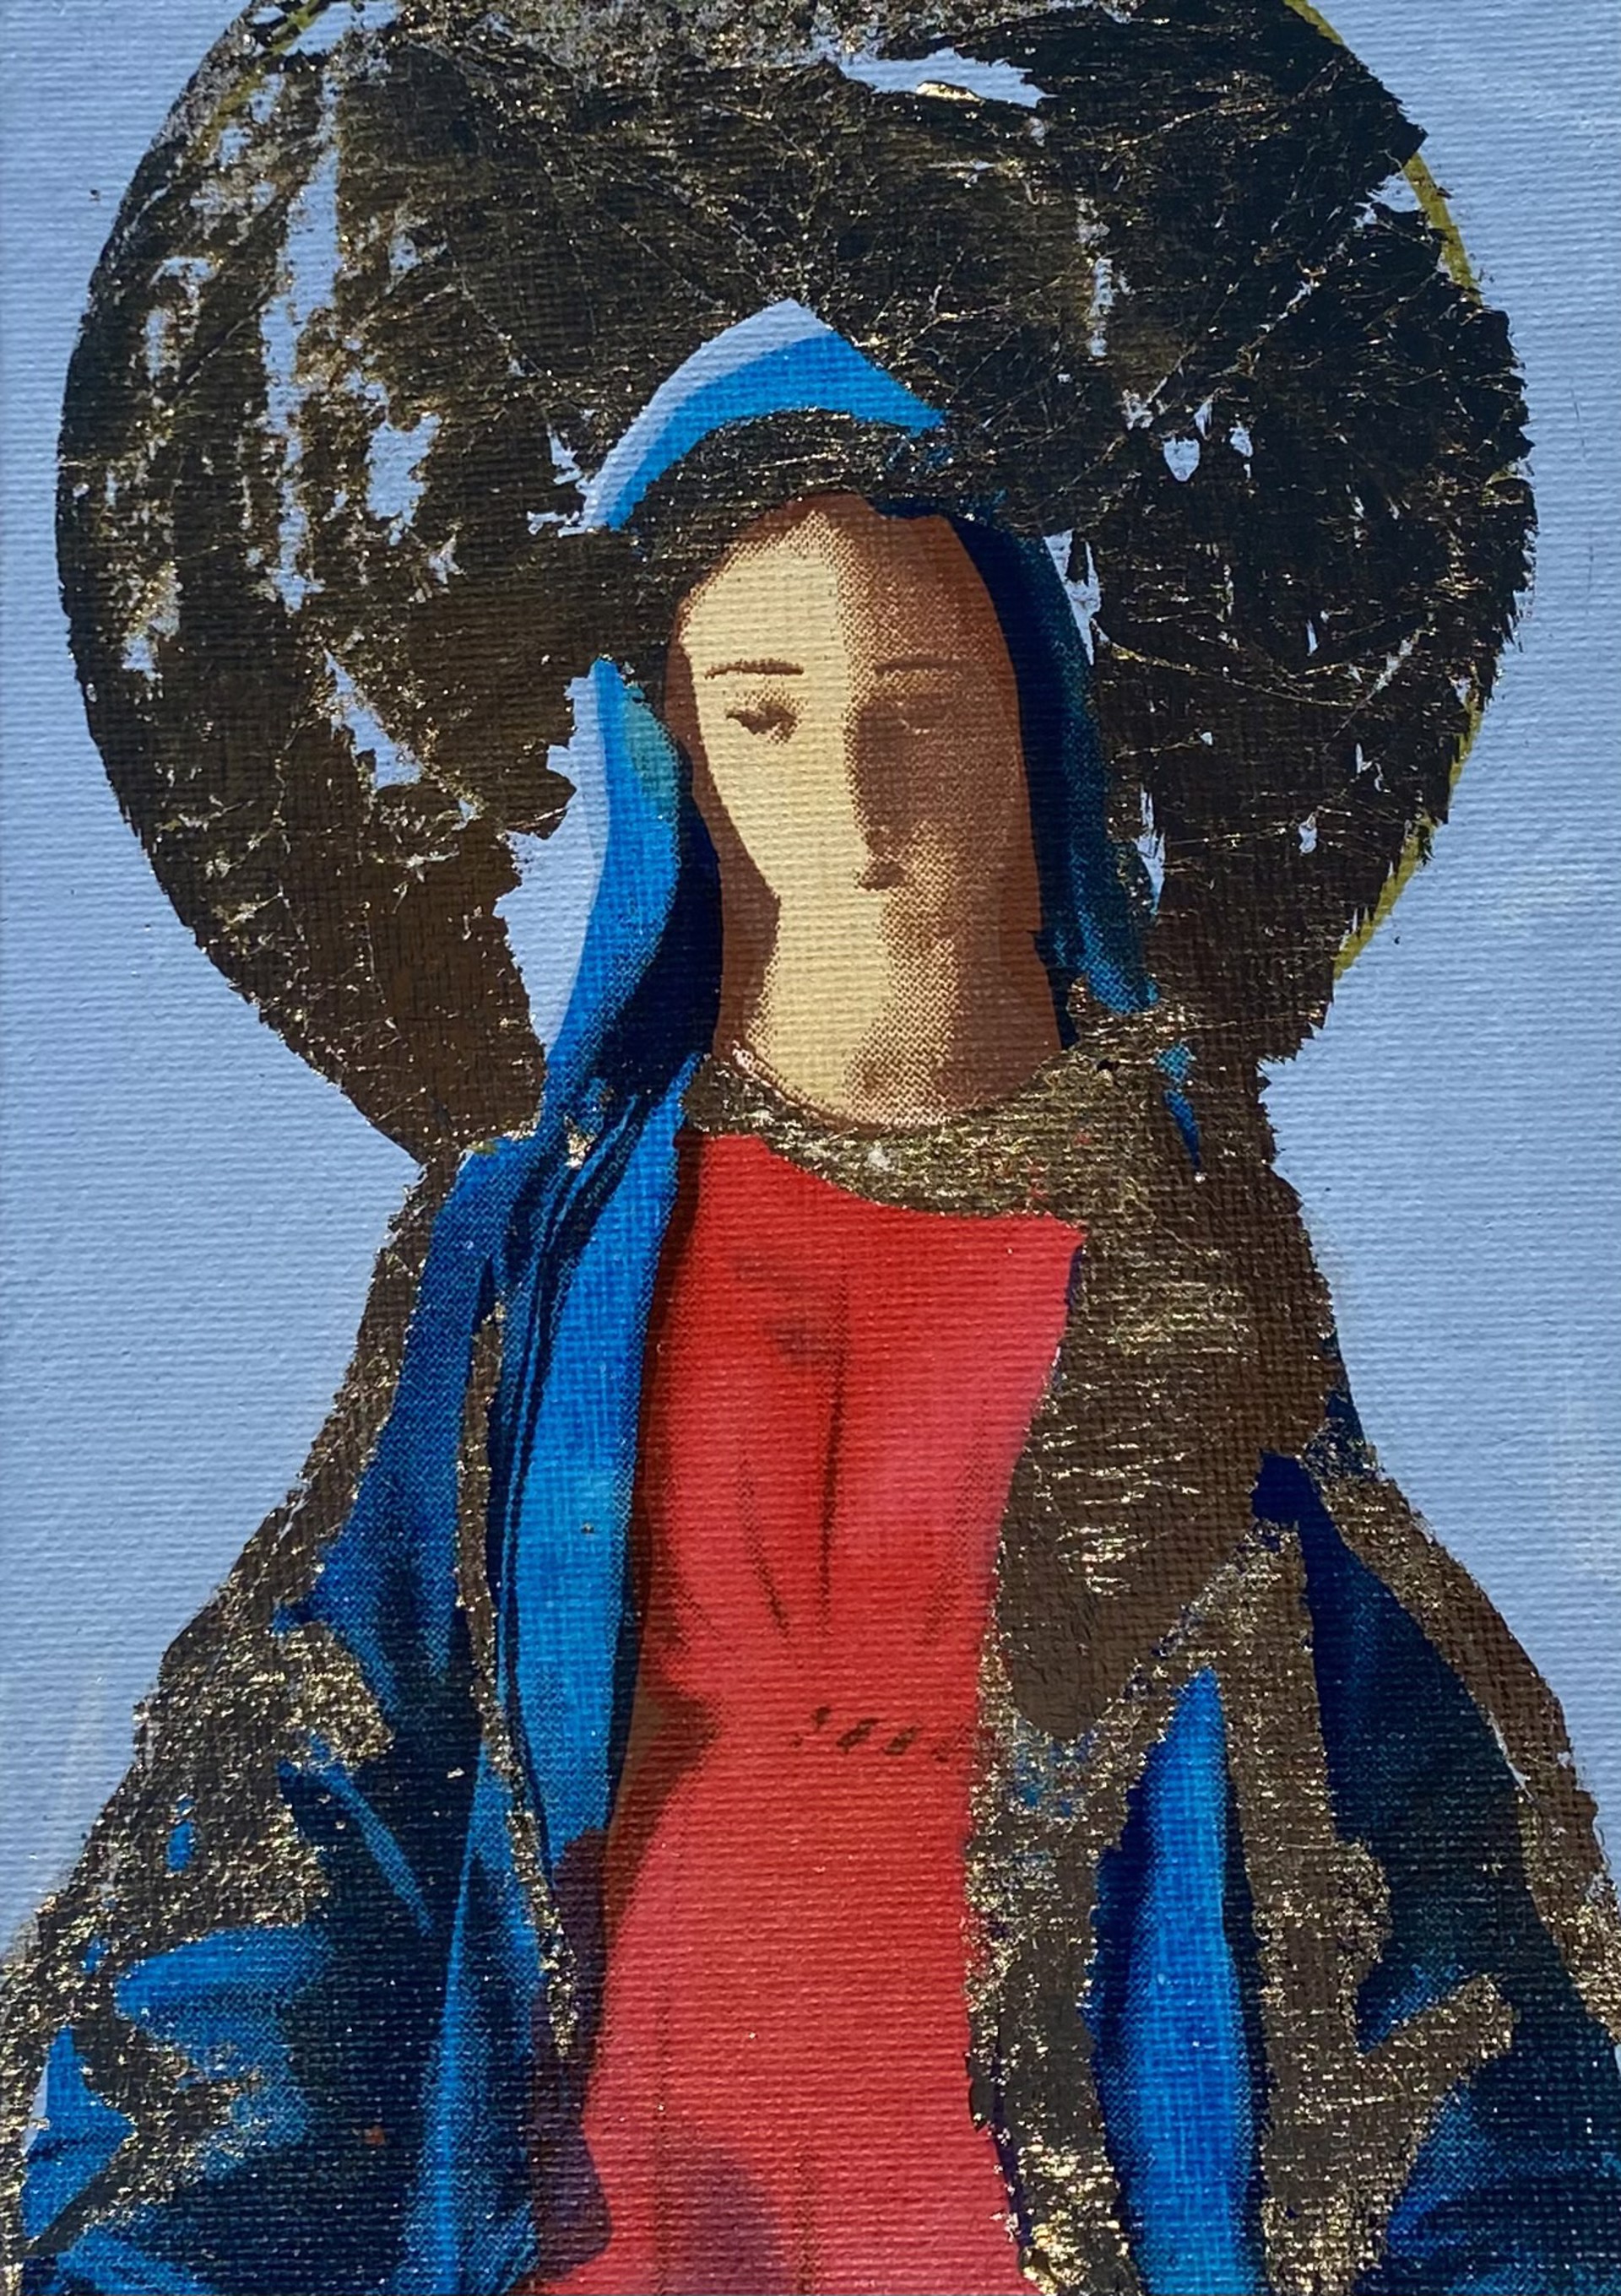 Hail Mary 15 by Megan Coonelly